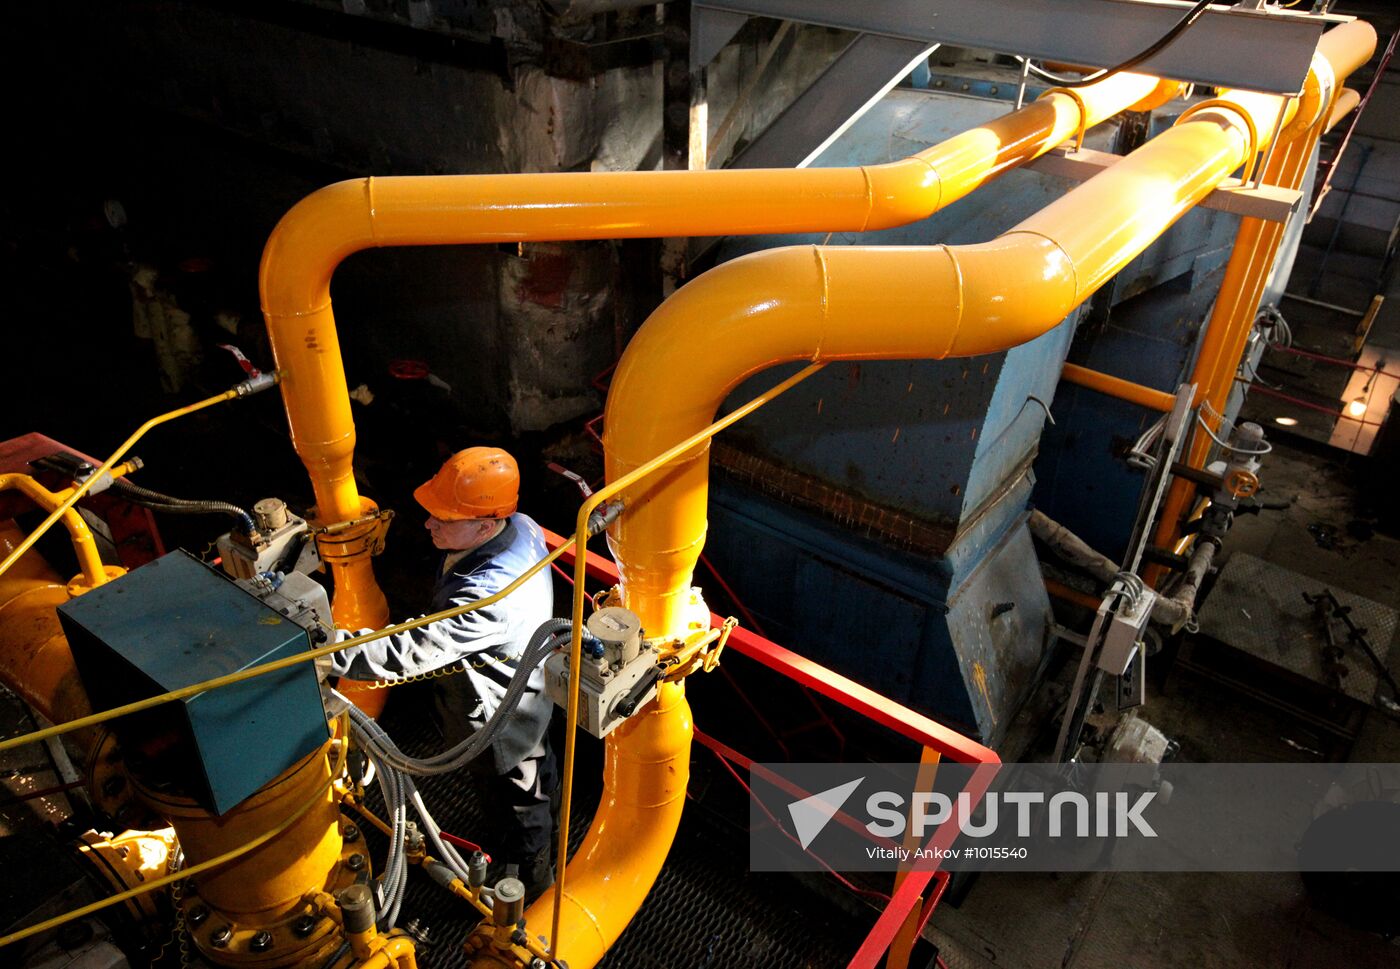 Vladivostok heating and power plants switch over to natural gas